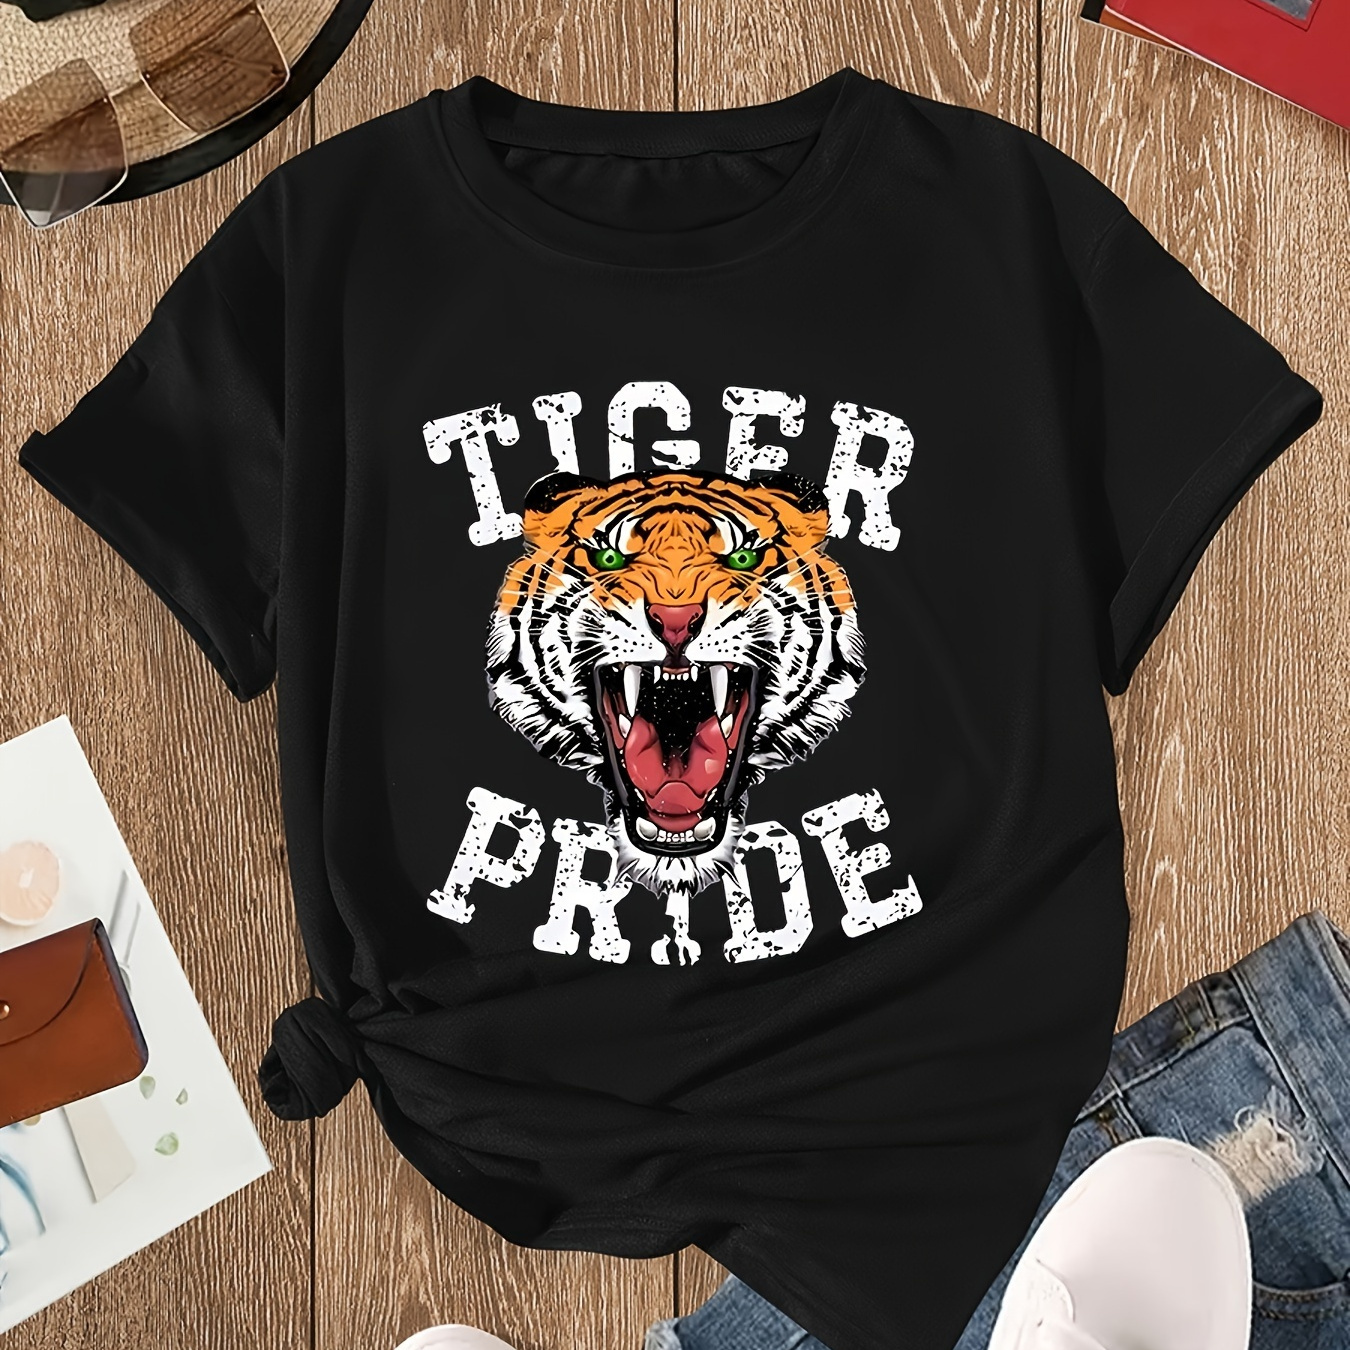 

Tiger Graphic Round Neck Short Sleeve T-shirt, Casual Sports Tee, Women's Activewear